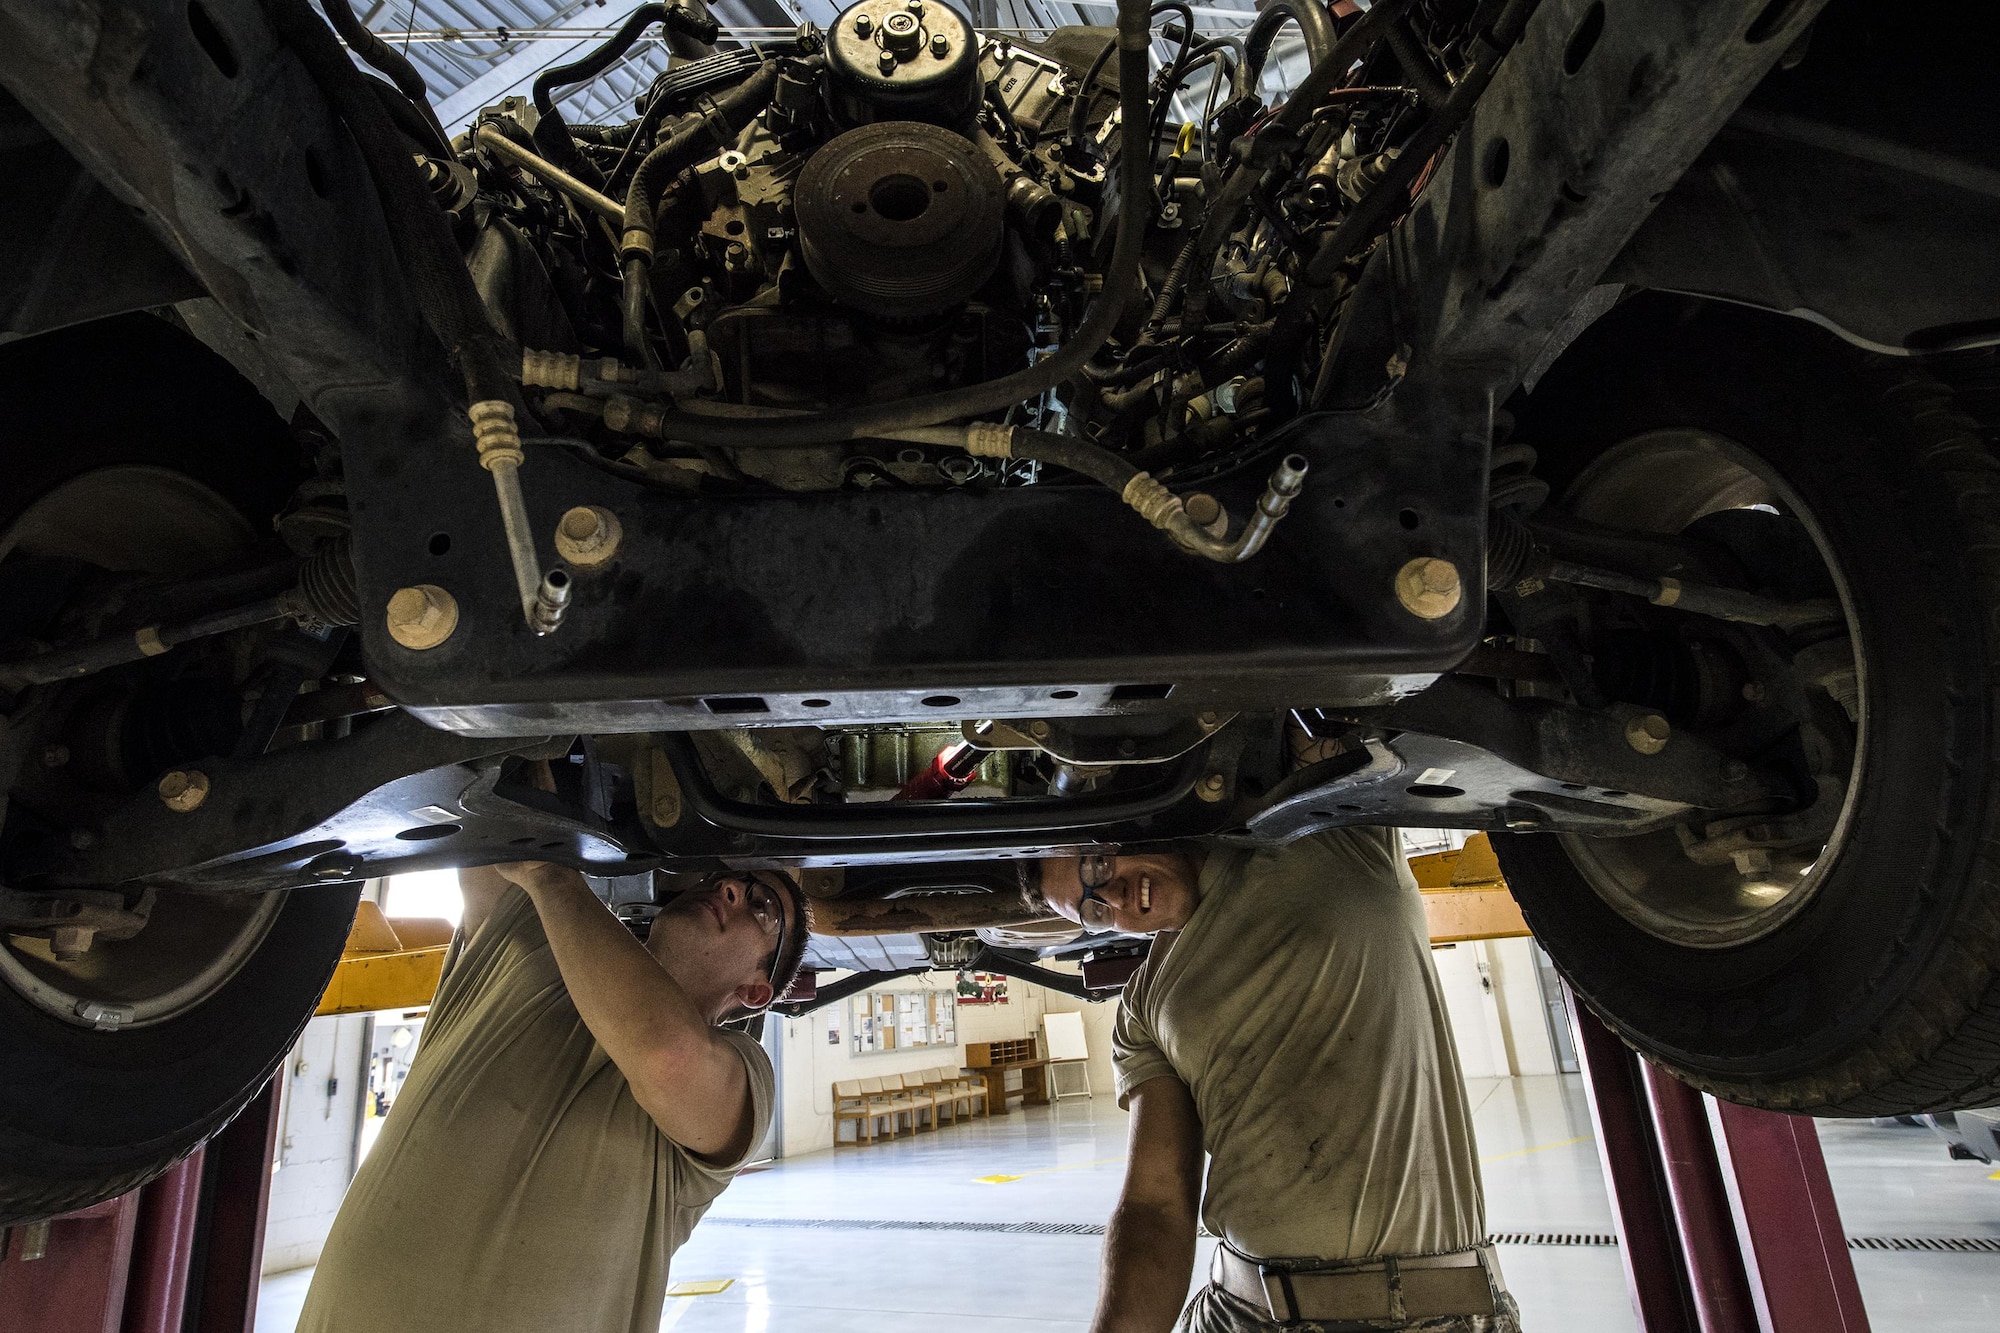 Senior Airman Corbin Mellor, left, and Airman 1st Class Gavin McClaskey, 23d Logistics Readiness Squadron vehicle maintenance technicians, search for bolts connected to an engine, Oct. 12, 2016, at Moody Air Force Base, Ga. After loosening the bolts, the technicians removed the V6 engine to replace and repair the assembly that connects the crank shaft to the camshaft. (U.S. Air Force photo by Airman 1st Class Janiqua P. Robinson)